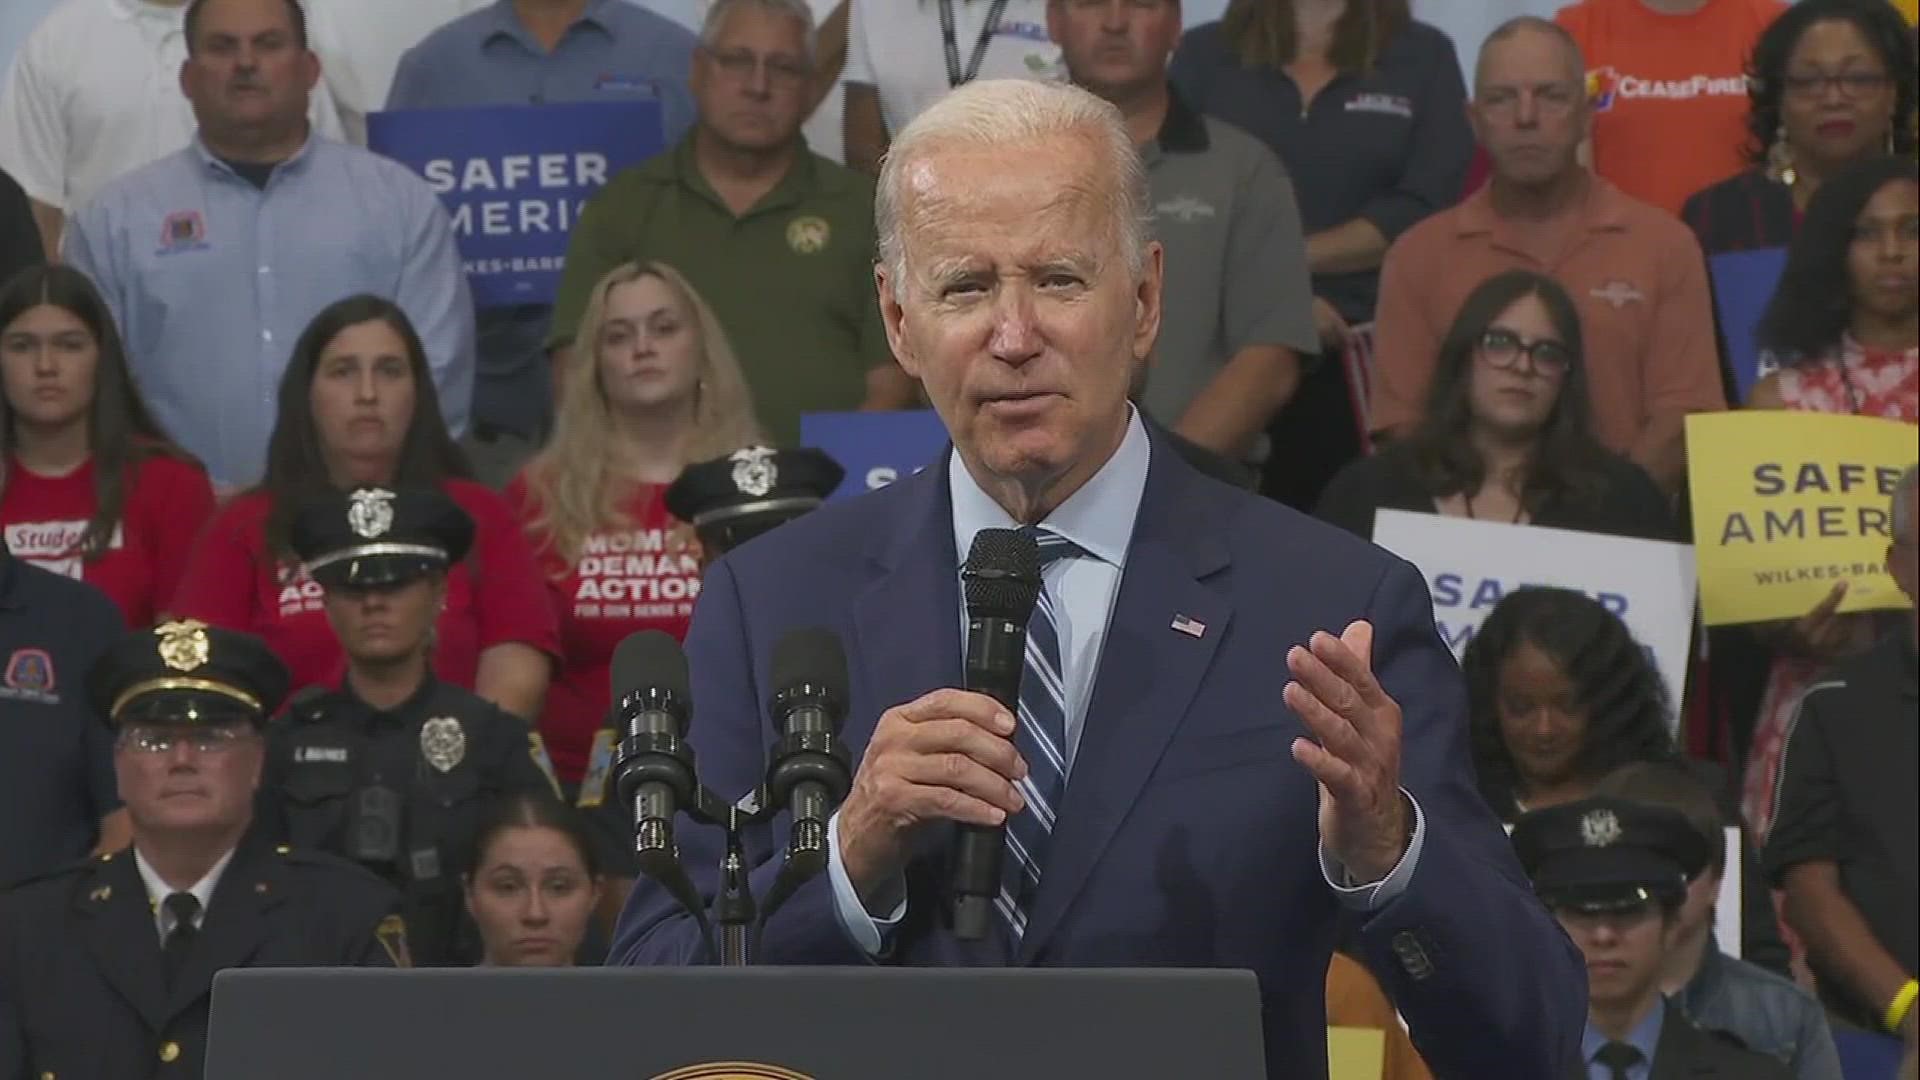 President Joe Biden brought his blueprint for community policing and crime prevention to Wilkes University on Tuesday afternoon.